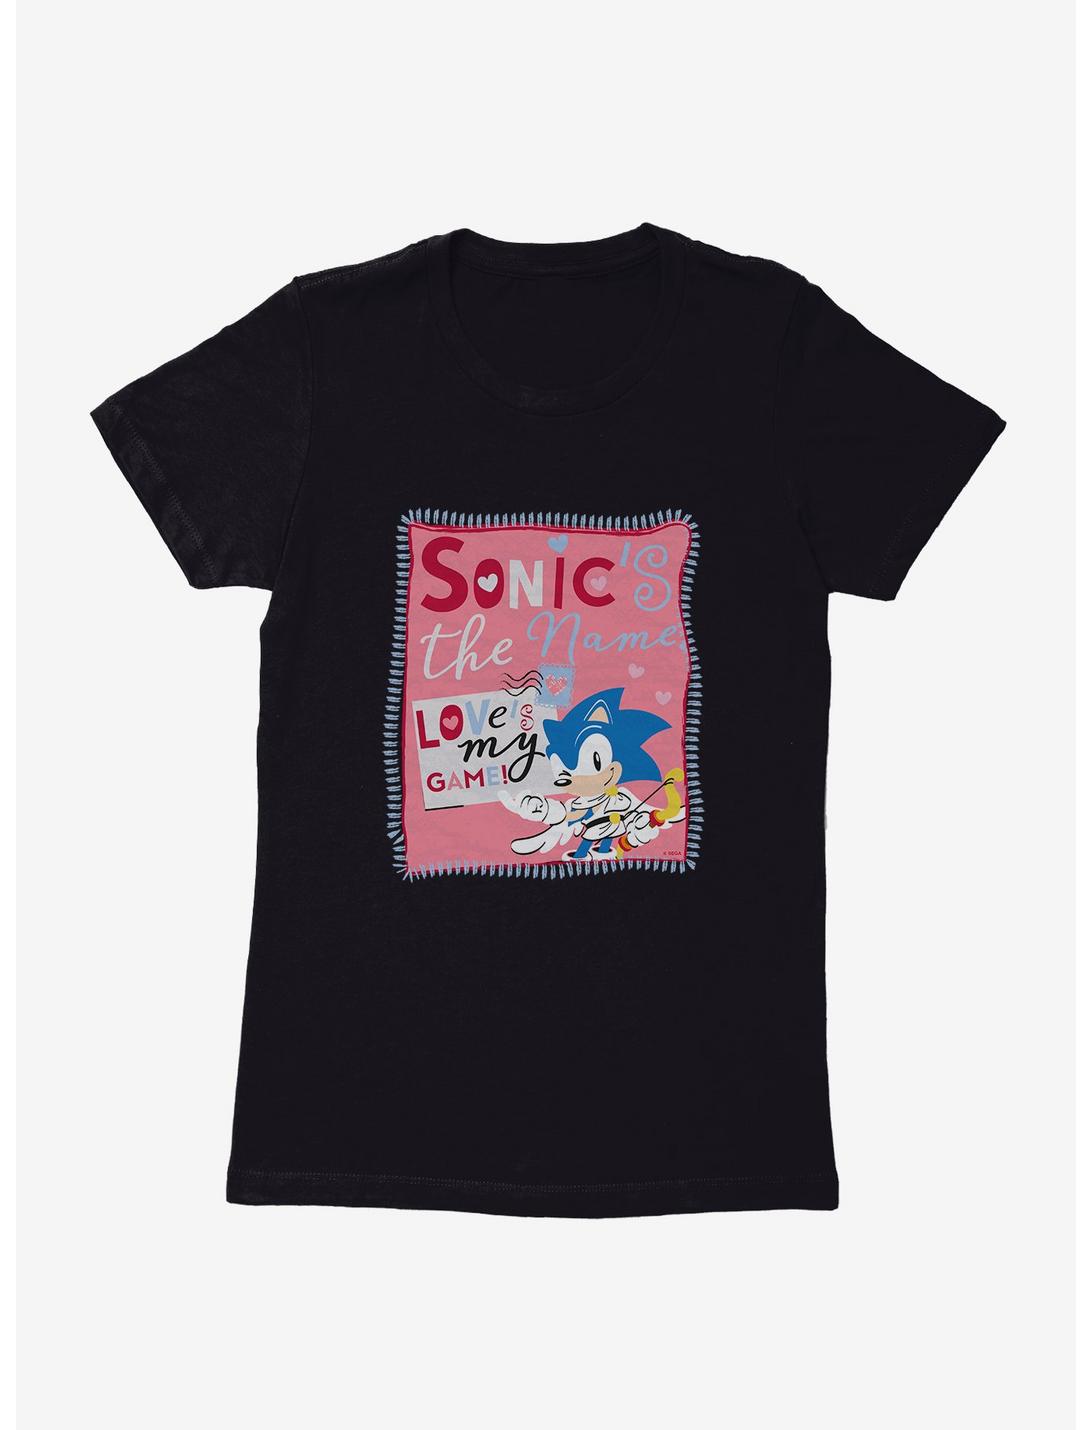 Sonic The Hedgehog Sonic's The Name Love's My Game Womens T-Shirt, , hi-res